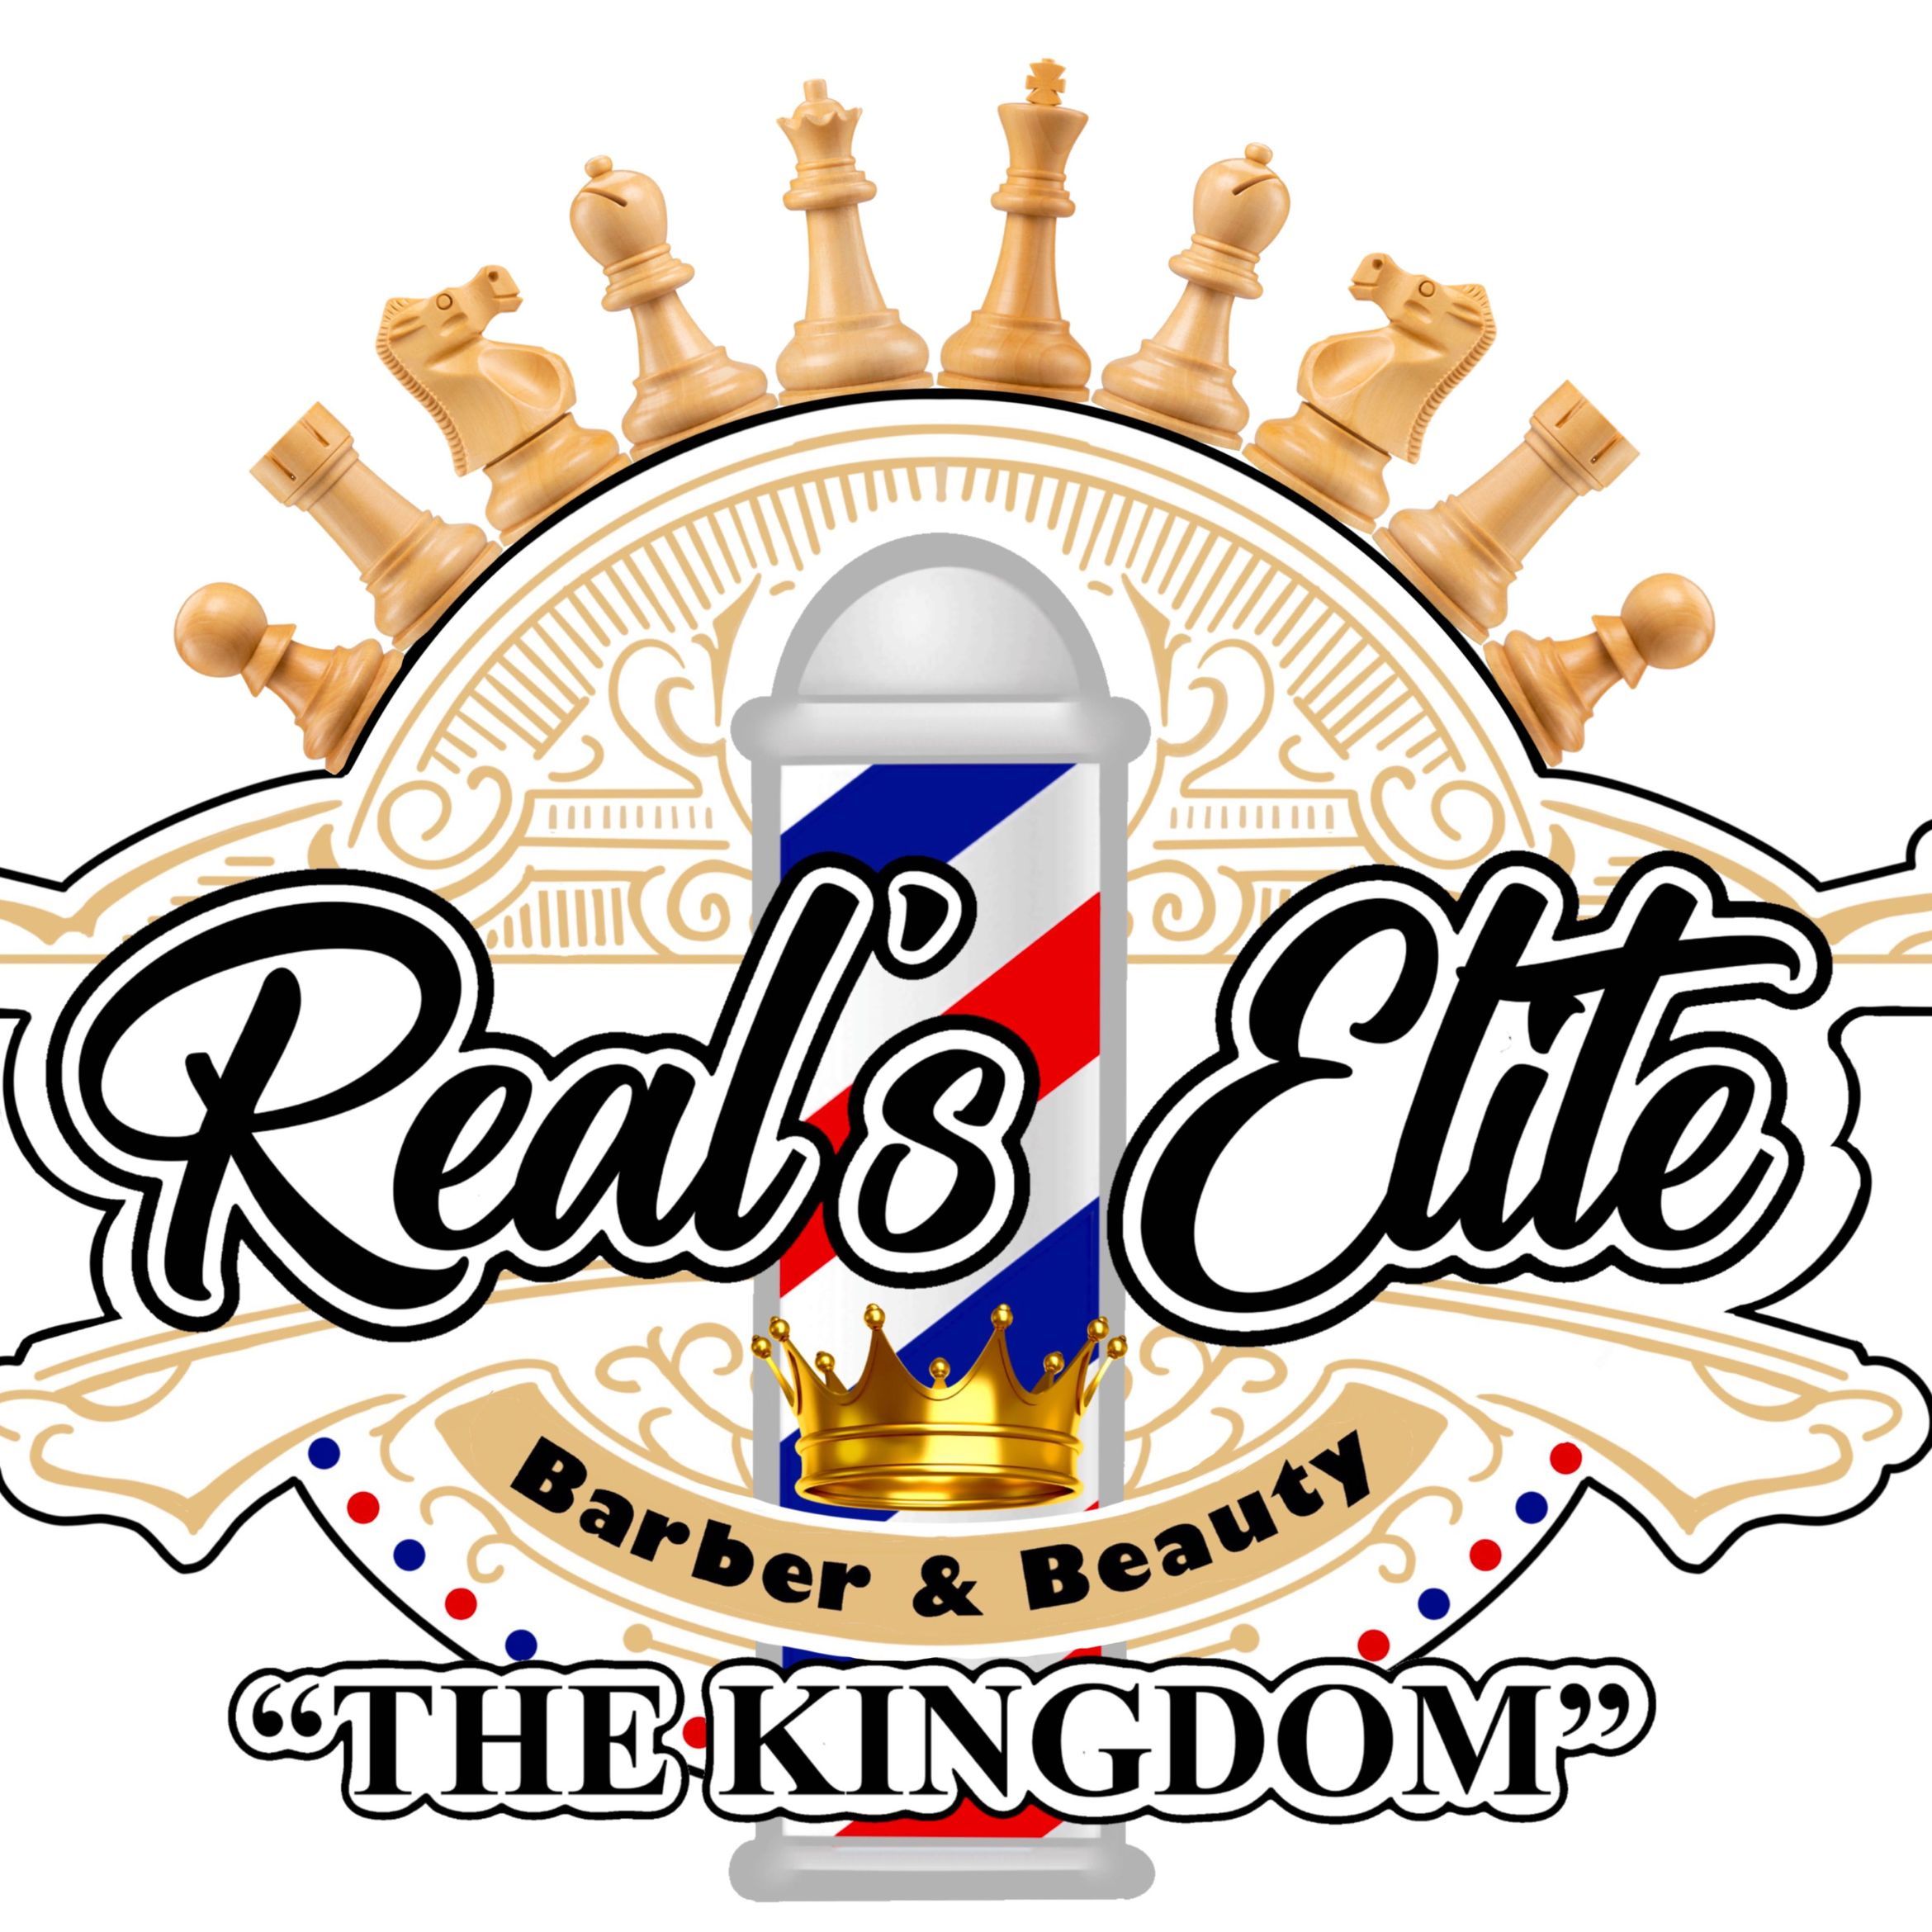 Real’s Elite Barber And Beauty, 180 Athens St, Hartwell, 30643